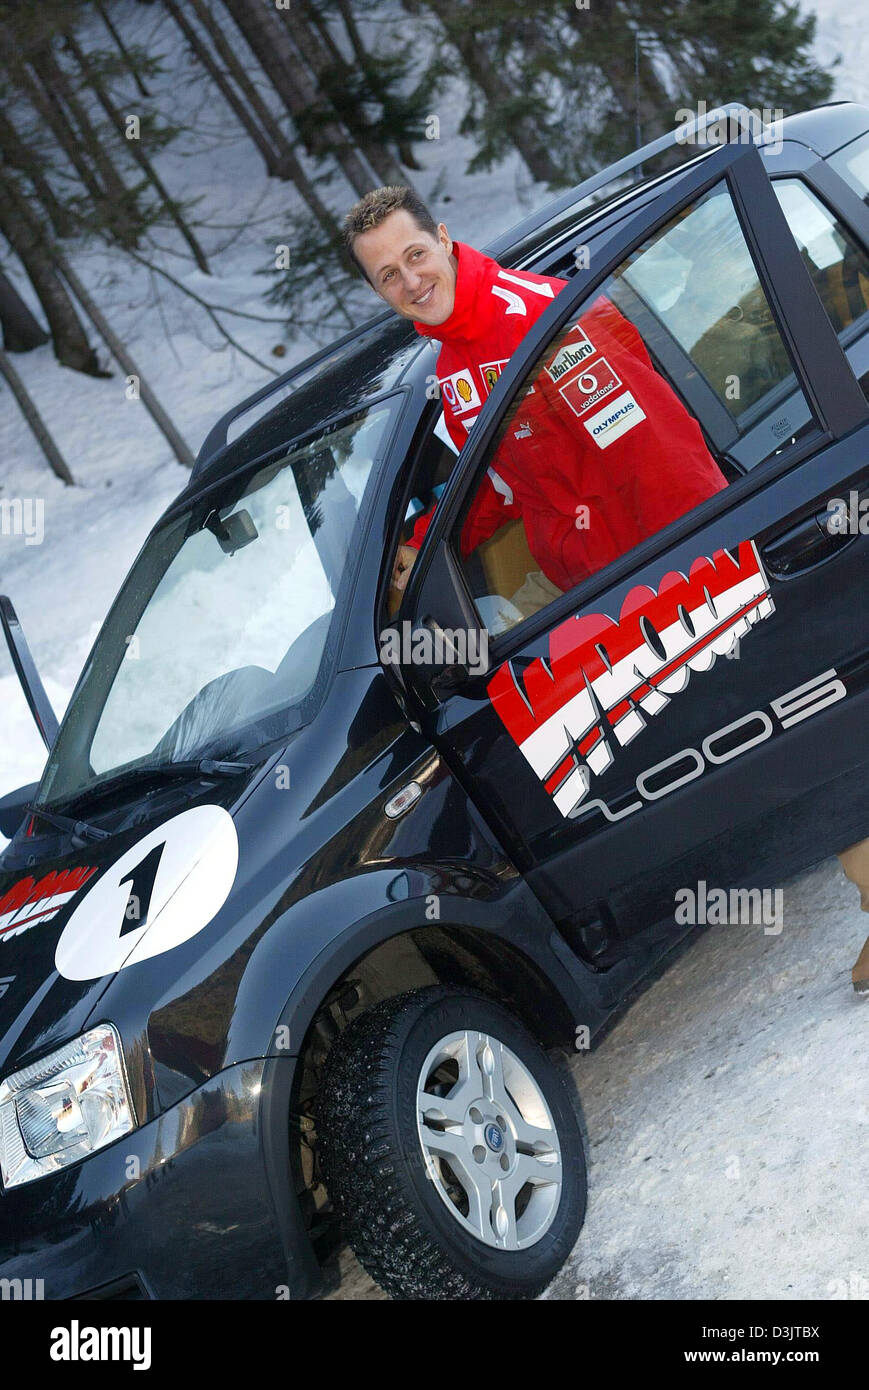 (dpa) - Seven time Formula 1 champion Michael Schumacher (team Ferrari) smiles as he stands next to a car with the word 'Wrooom' written on it shortly after arriving in the ski resort of Madonna di Campiglio, Italy, 11 January 2005. The Ferrari team got together for its traditional ski vacation under the motto 'Wrooom' in the Italian Alps. (ITALY OUT) Stock Photo